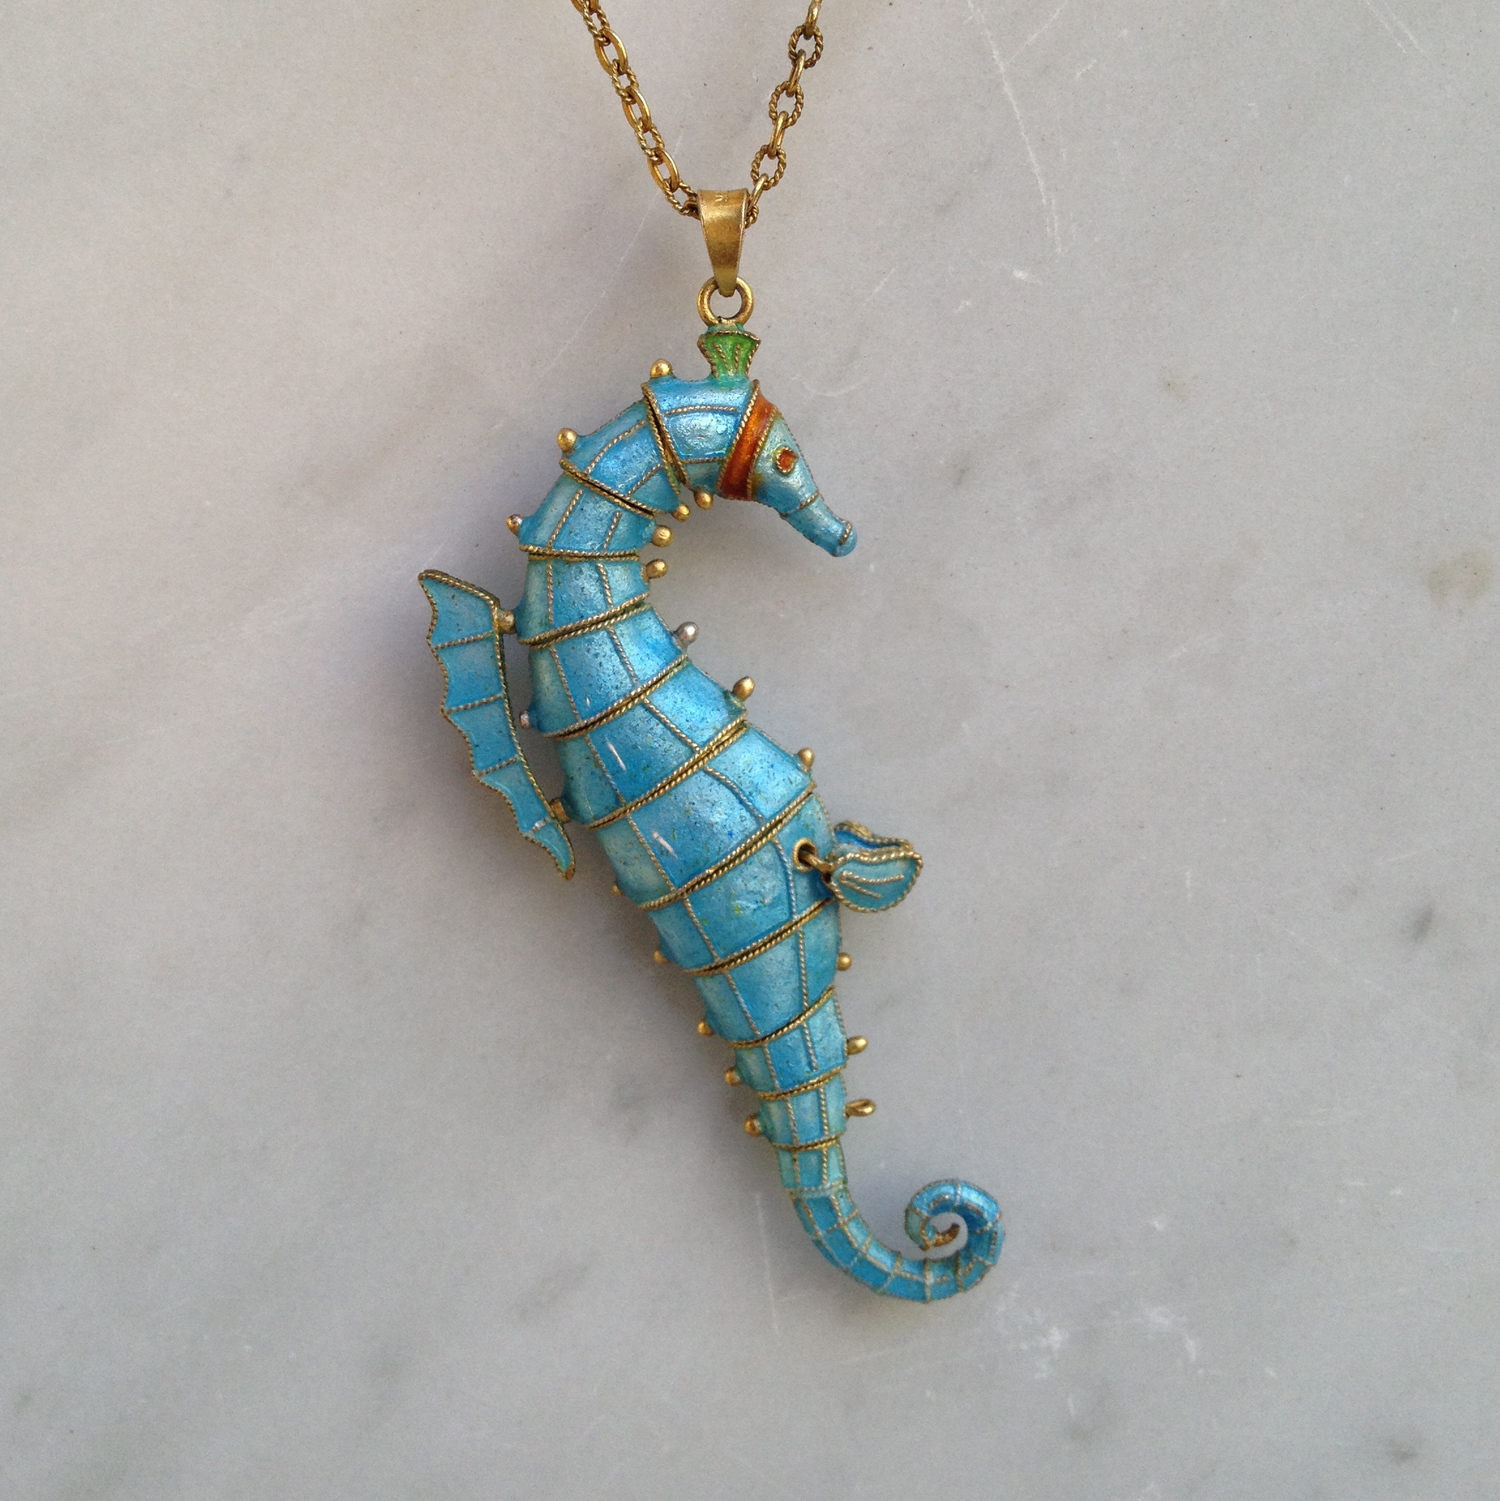 Vintage Gold Dipped Seahorse Pendant on 24 Gold Chain